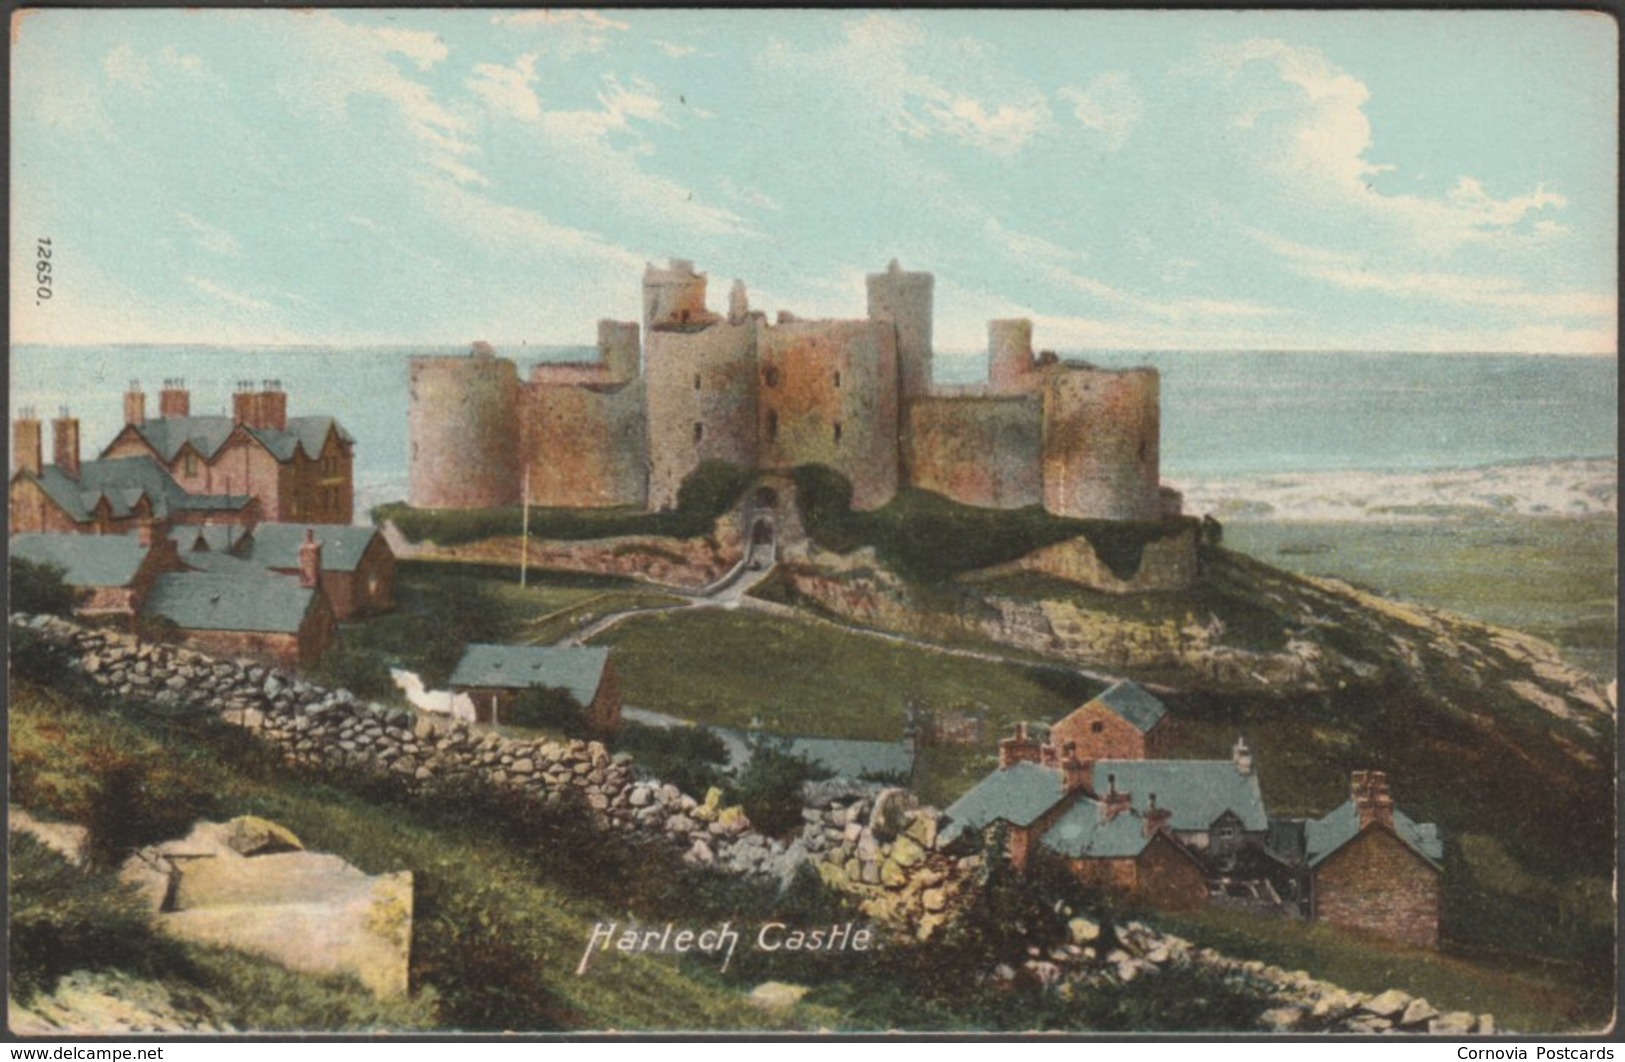 Harlech Castle, Merionethshire, C.1905 - Wrench Postcard - Merionethshire